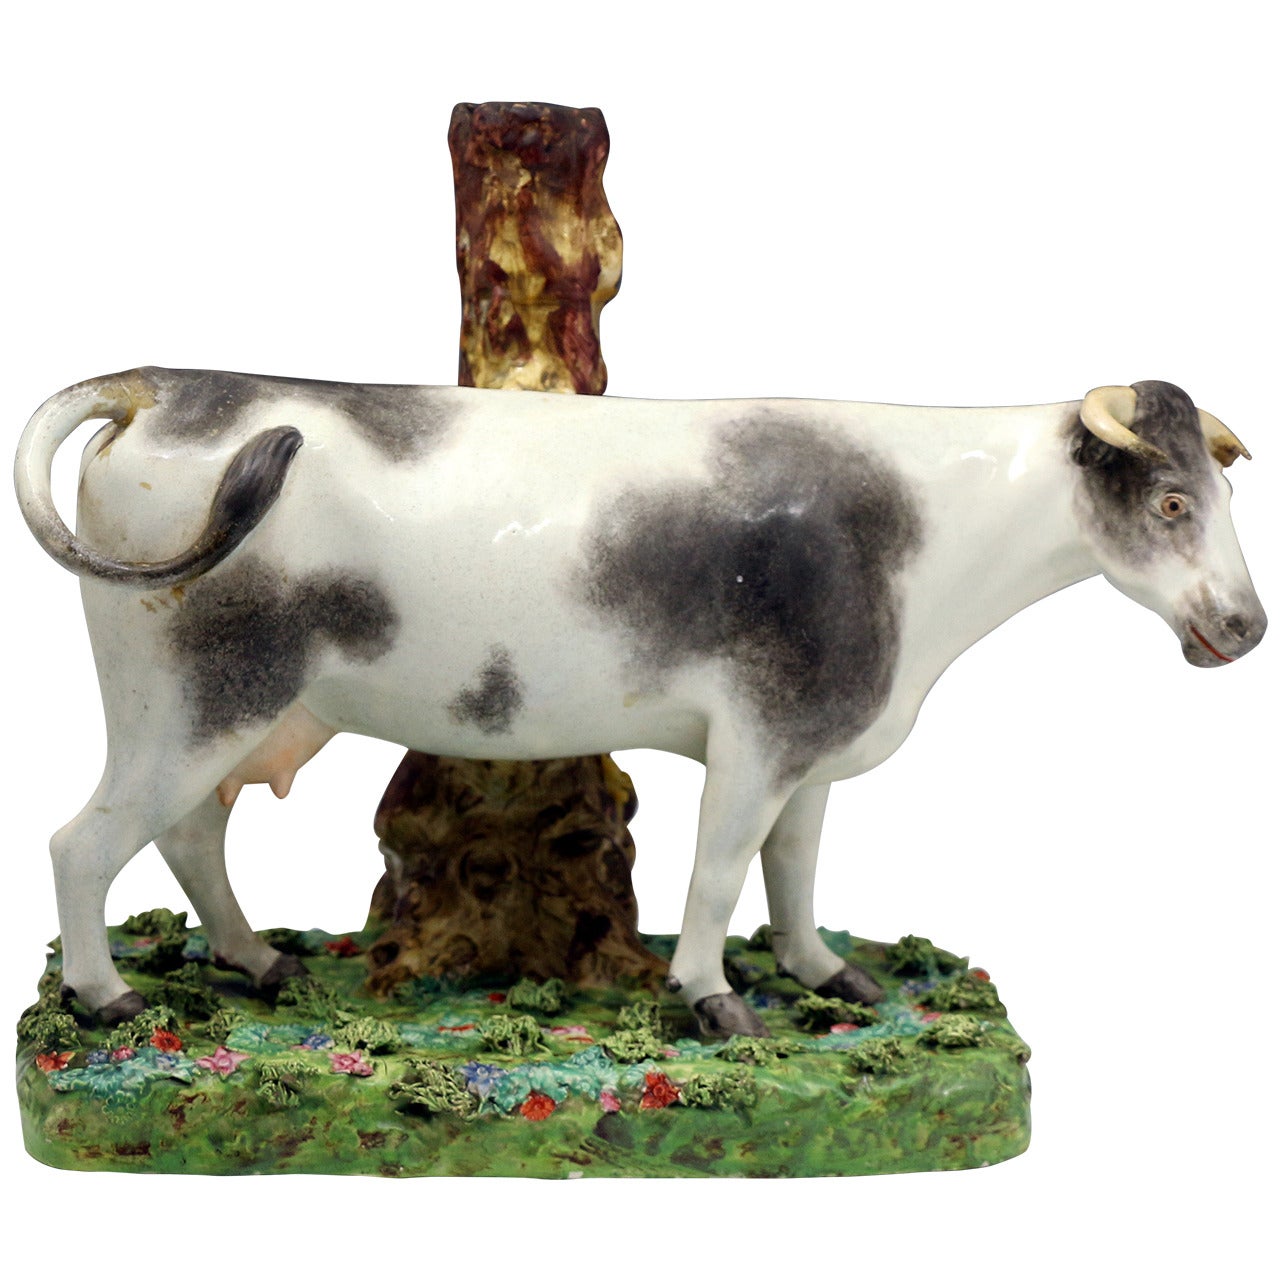 Massive Staffordshire Pearlware Pottery Figure of a Standing Cow on Colored Base